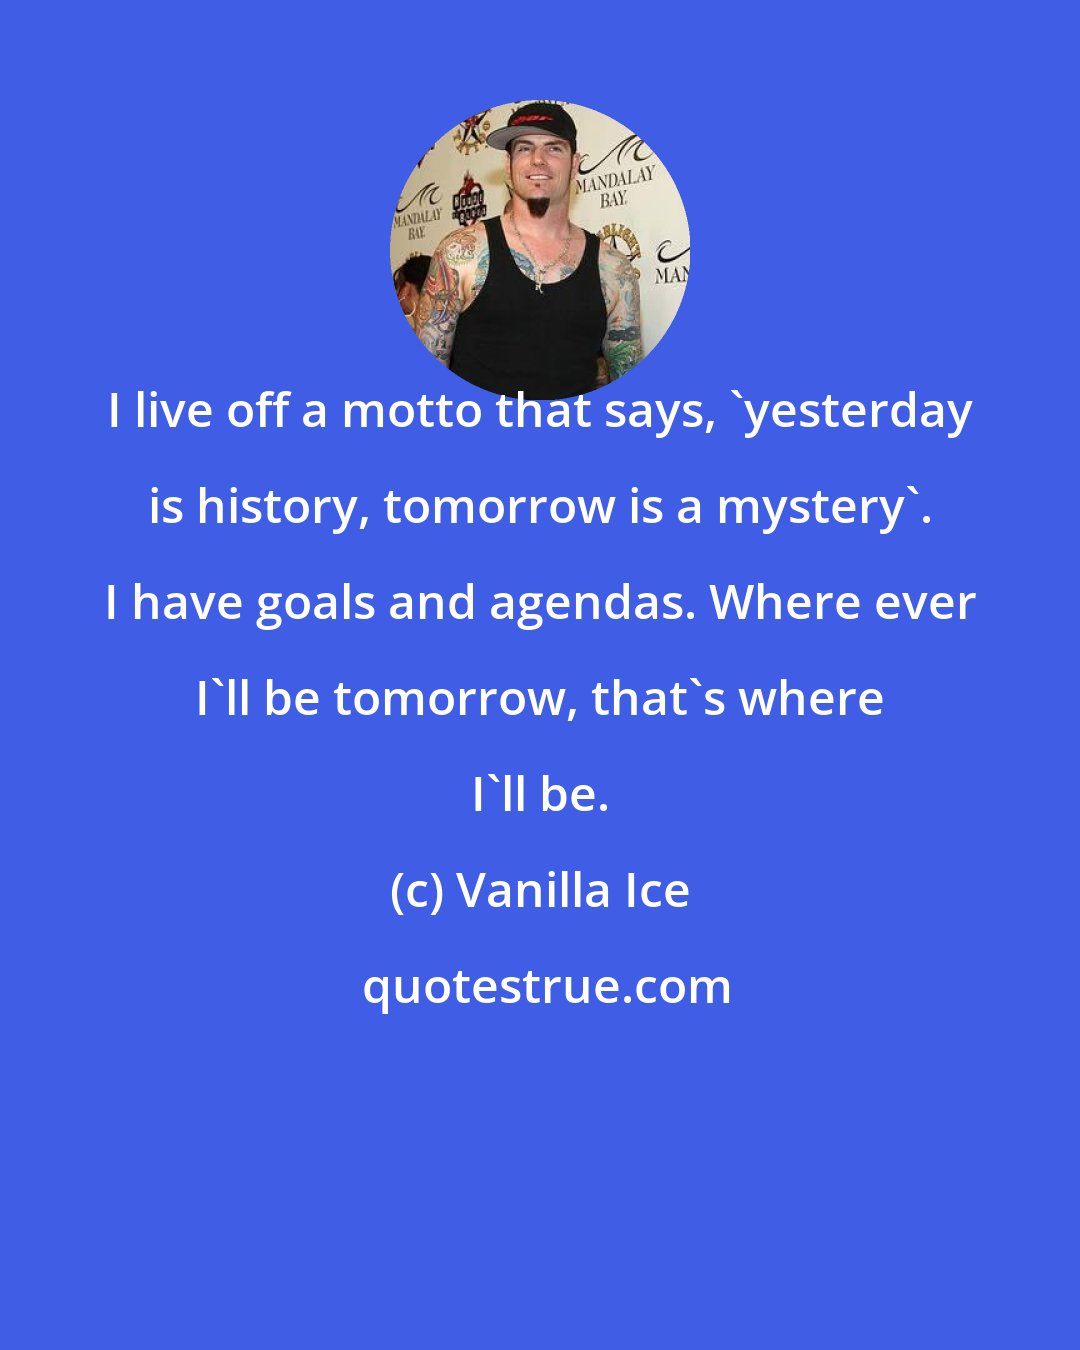 Vanilla Ice: I live off a motto that says, 'yesterday is history, tomorrow is a mystery'. I have goals and agendas. Where ever I'll be tomorrow, that's where I'll be.